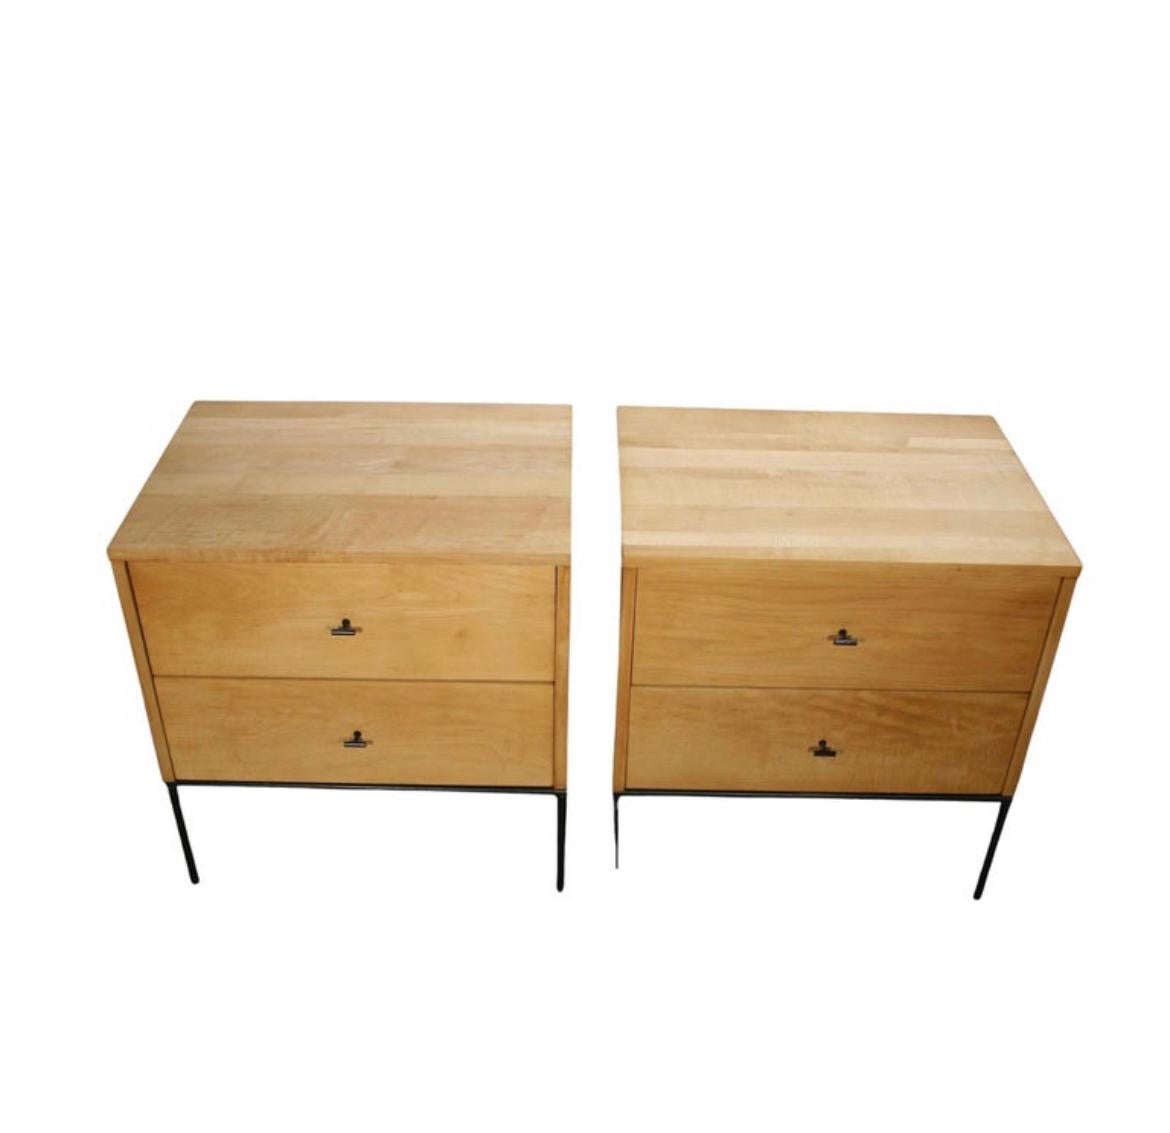 Beautiful pair of Paul McCobb 1950s #1503 blonde maple nightstands end tables double-drawer planner Group. Black steel T pull knobs. Refinished in raw blonde maple with clear lacquer. Very modern designed pair of nightstands with iron base with 4